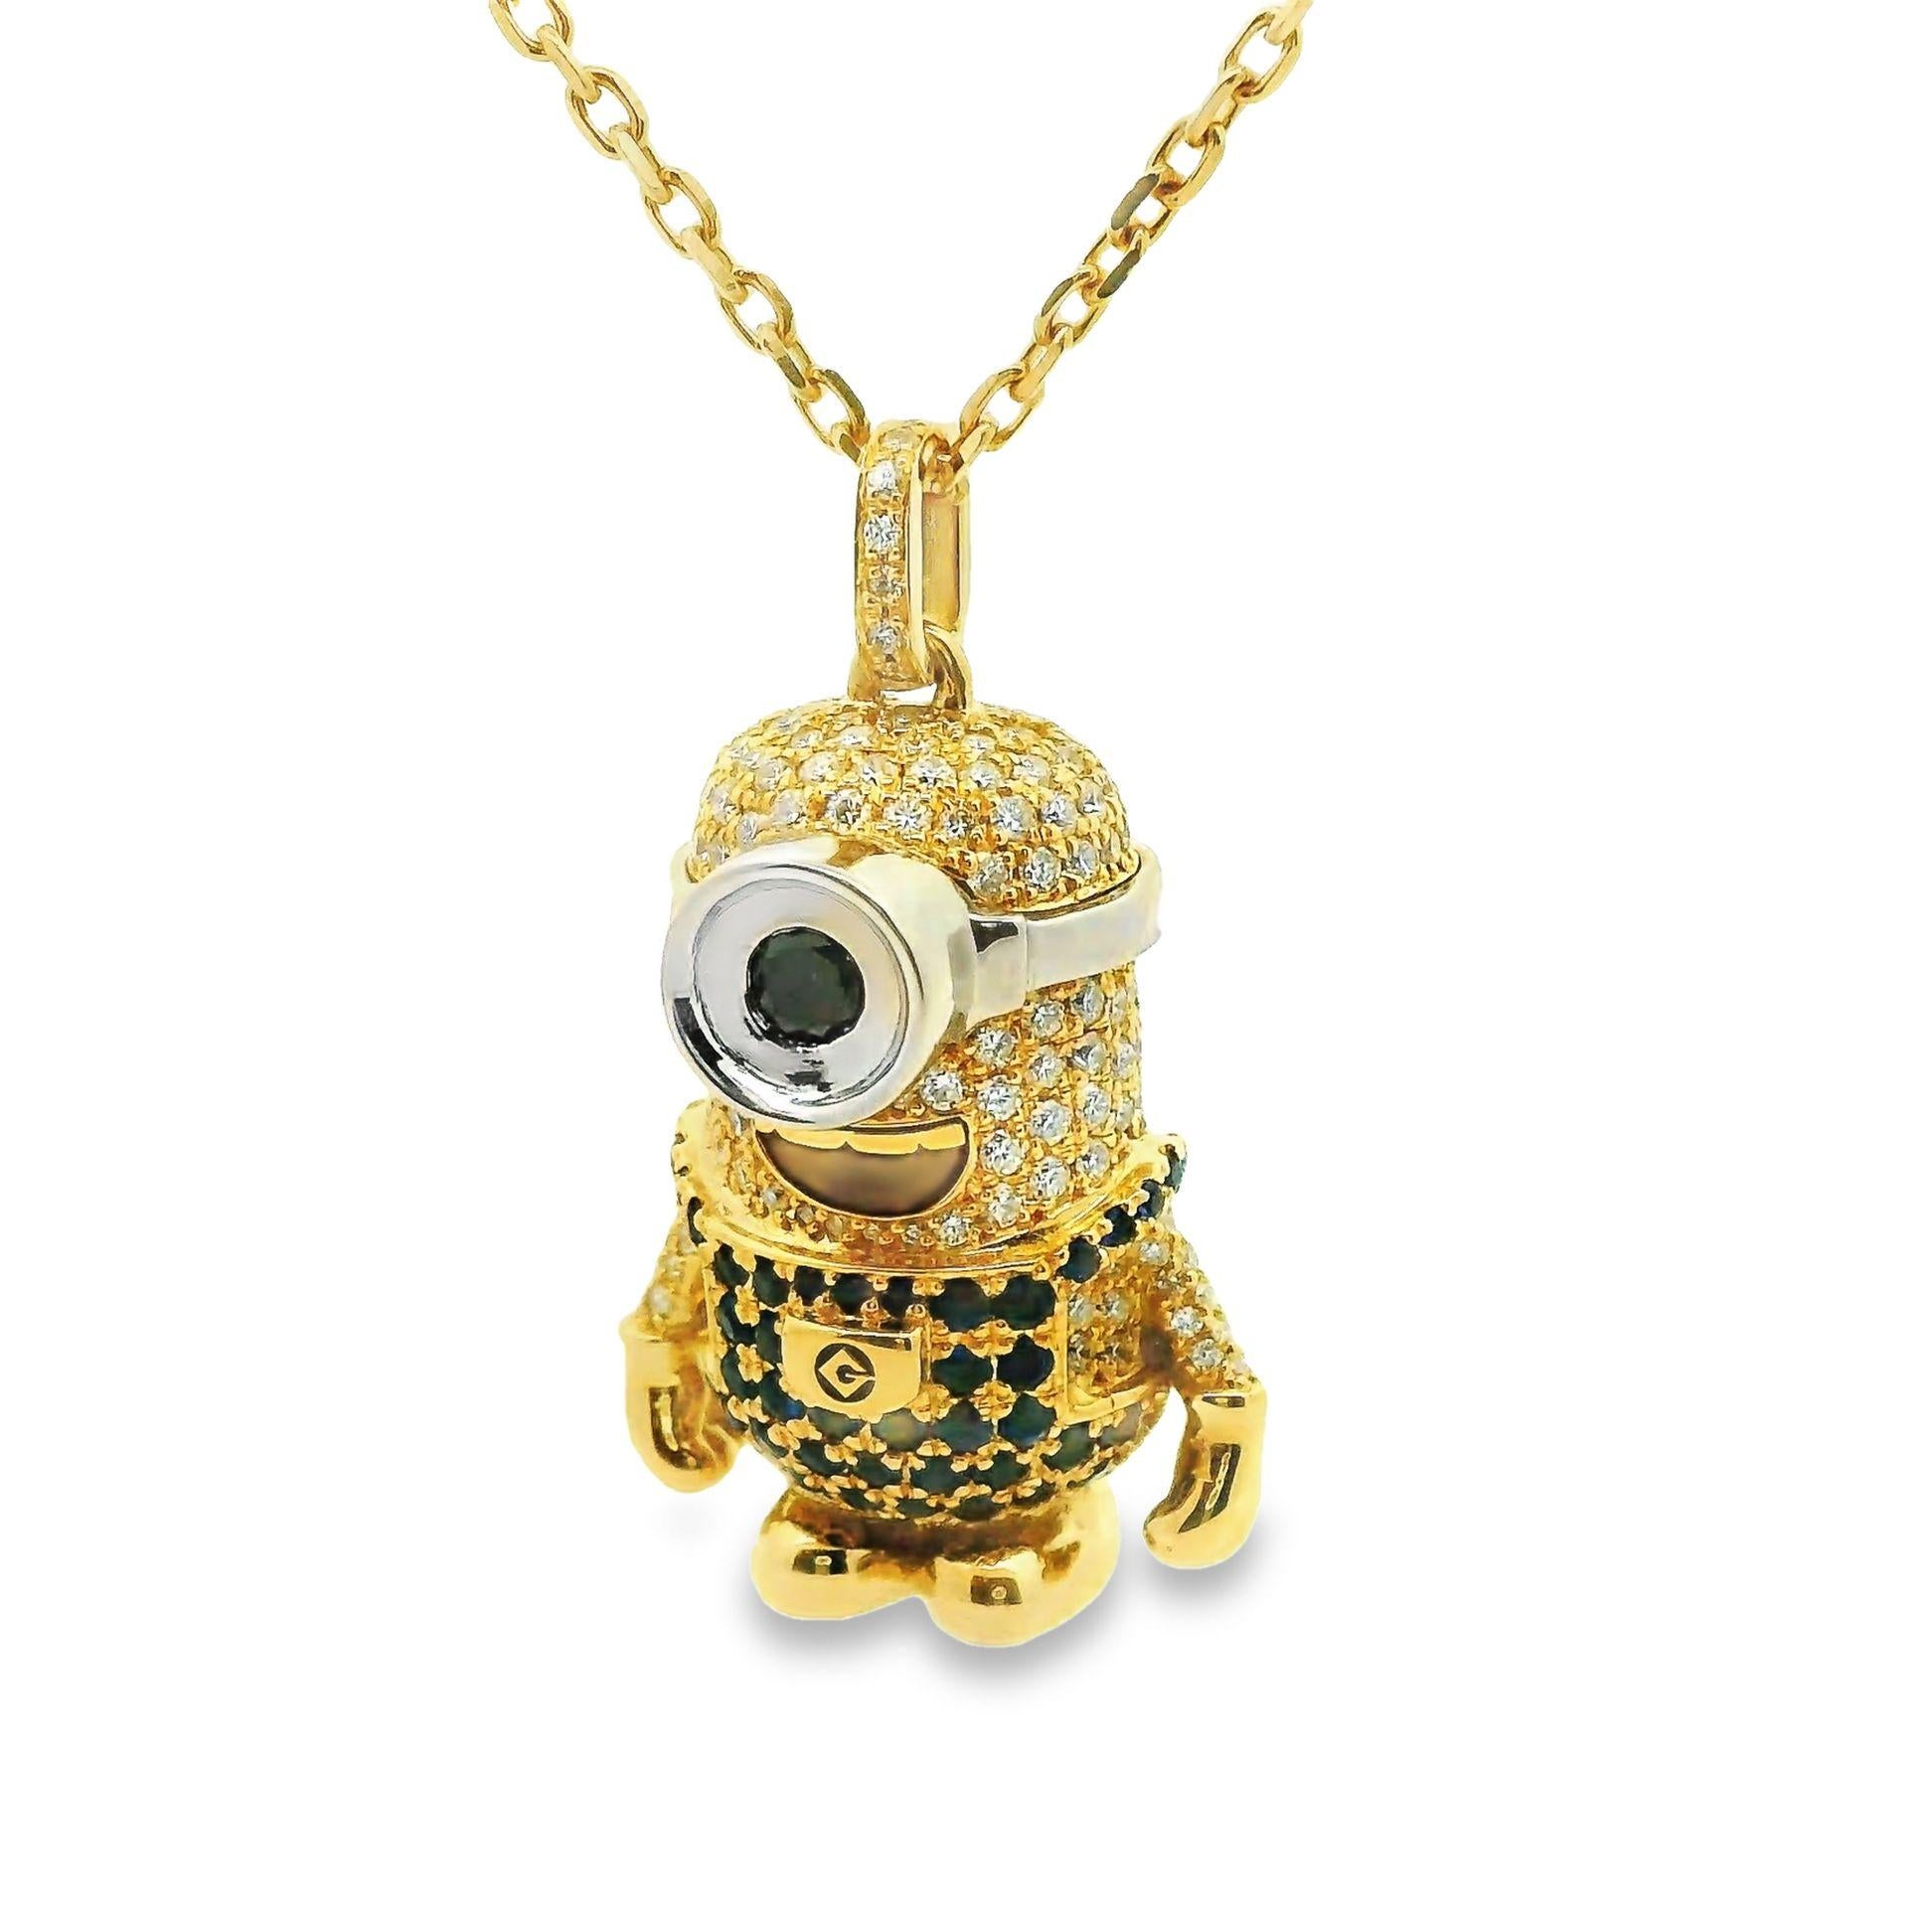 This unique minion necklace pendant is sure to bring smiles and laughter wherever it goes, a delightful homage to the animated icons. At its center sits a charming 0.13 carats black diamond, while the rest of the pendant is crafted with intricate